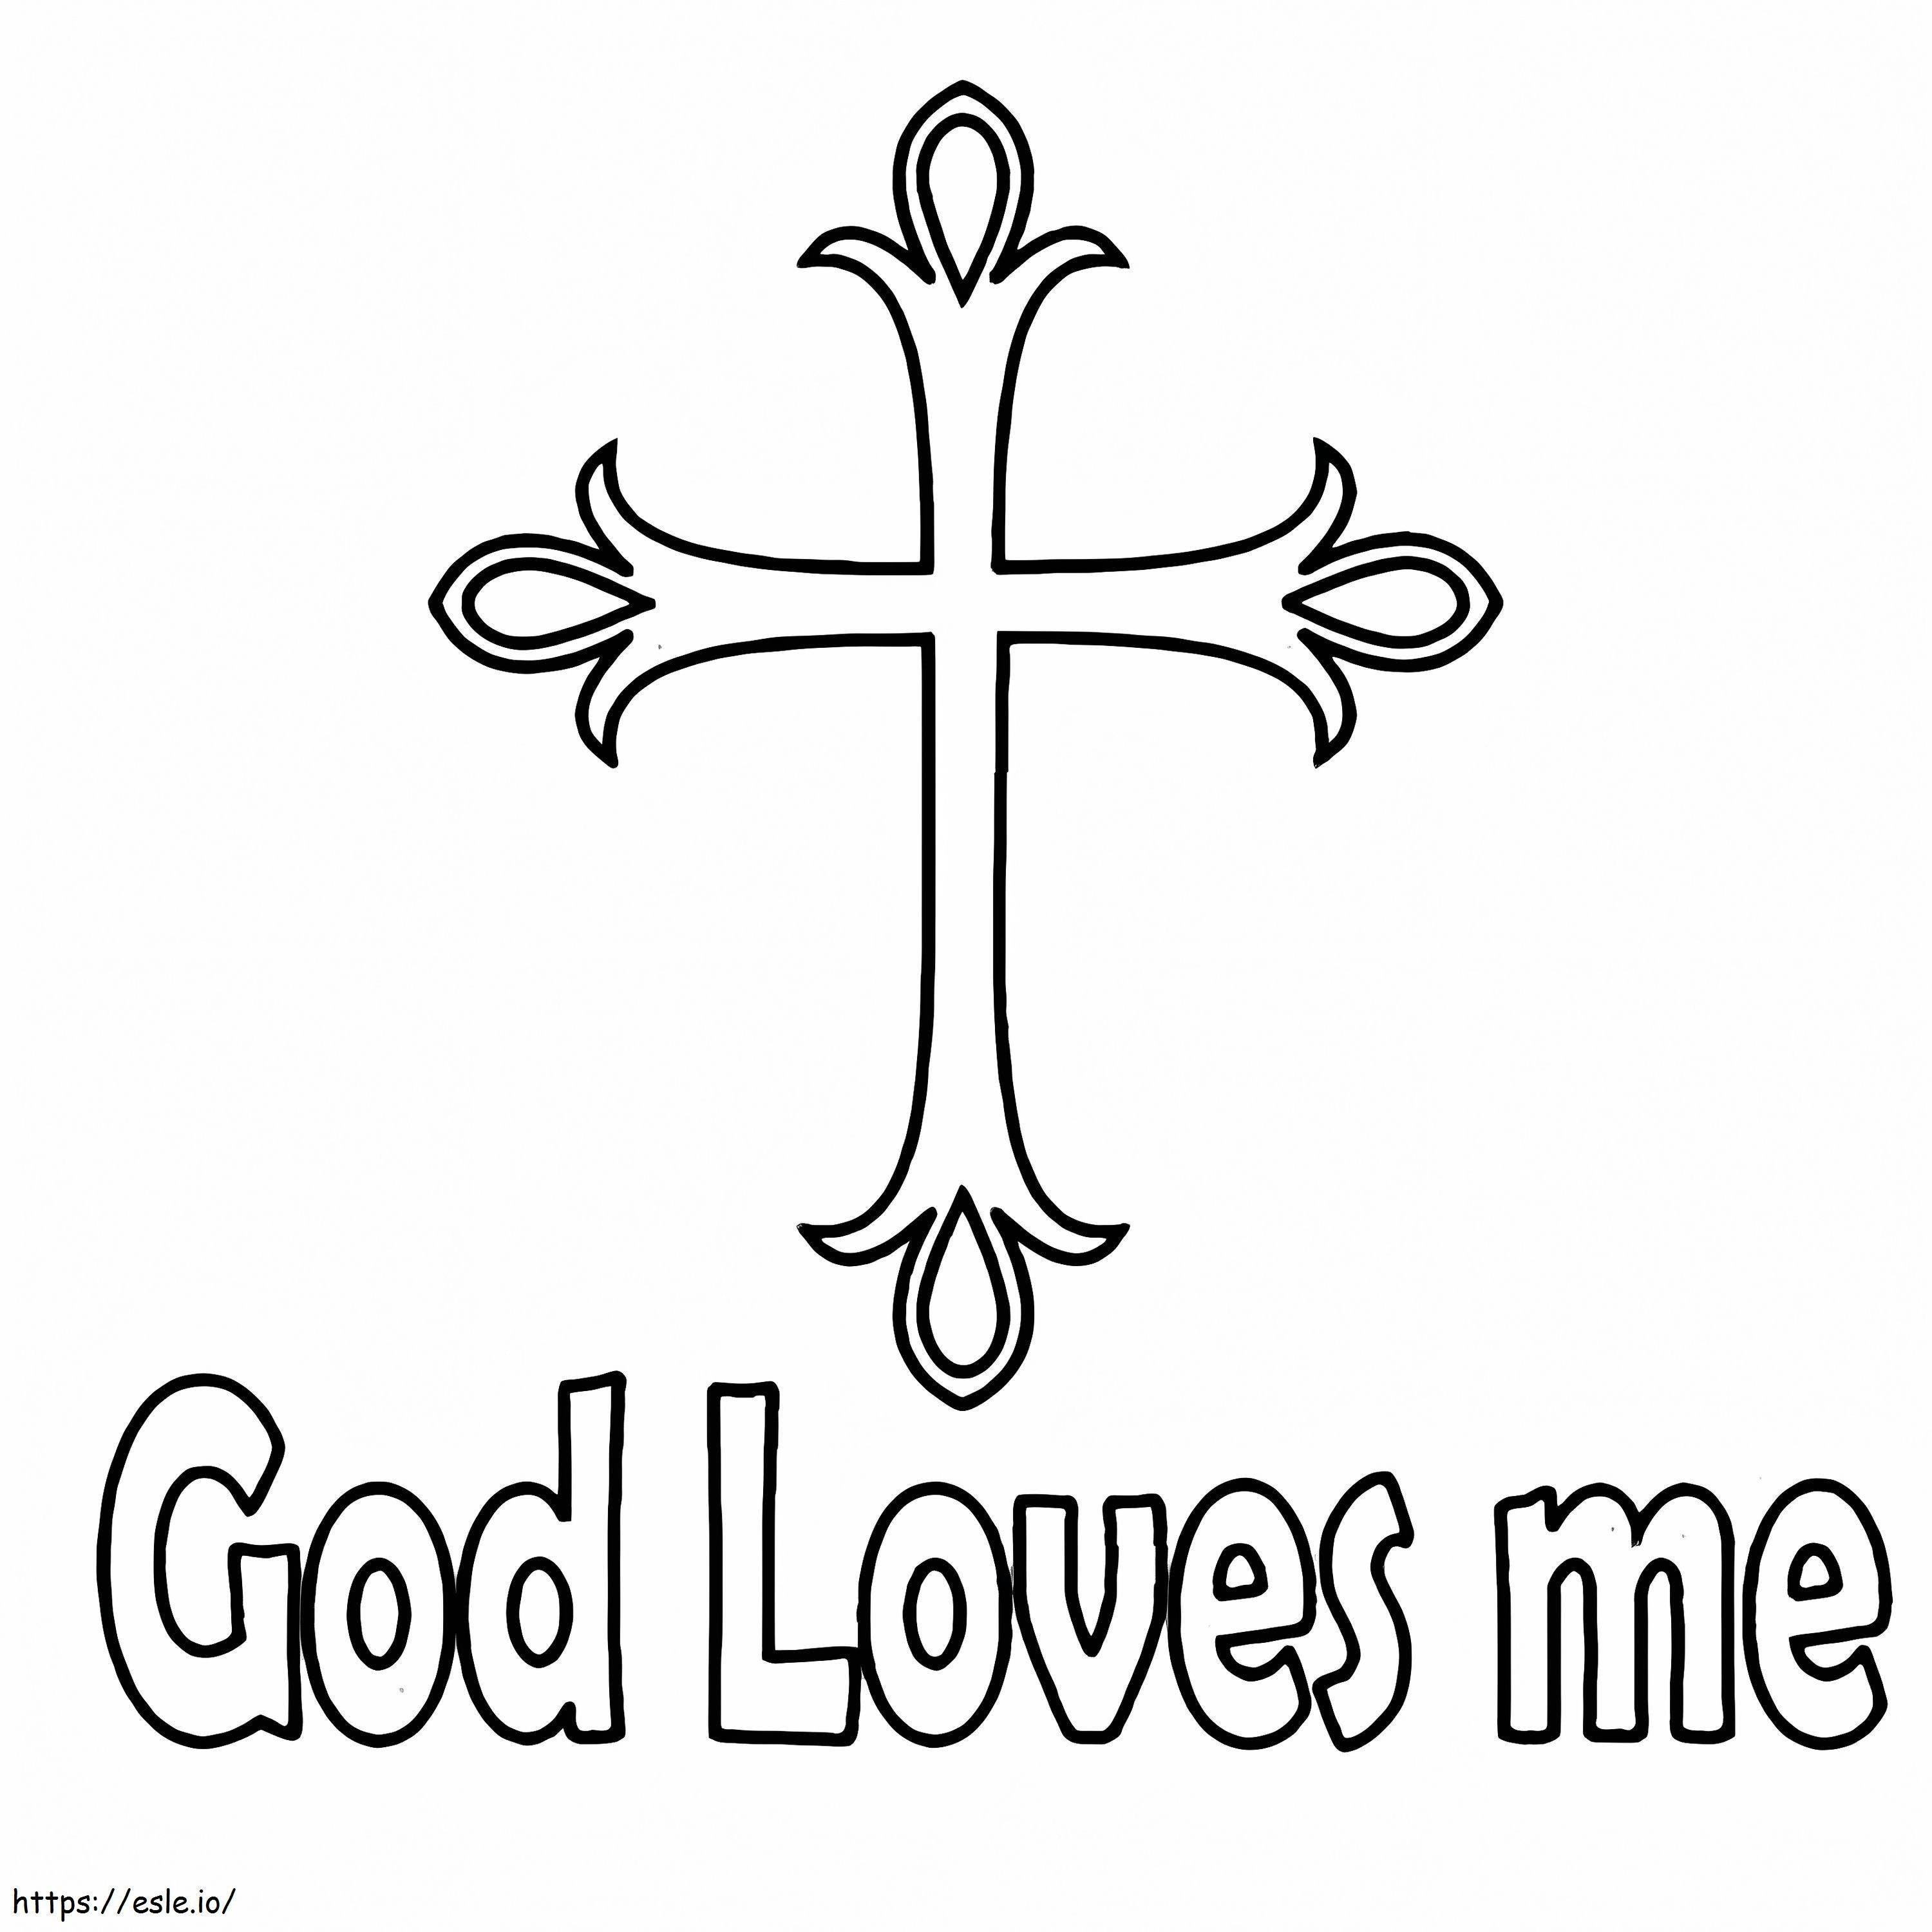 God Loves Me 5 coloring page